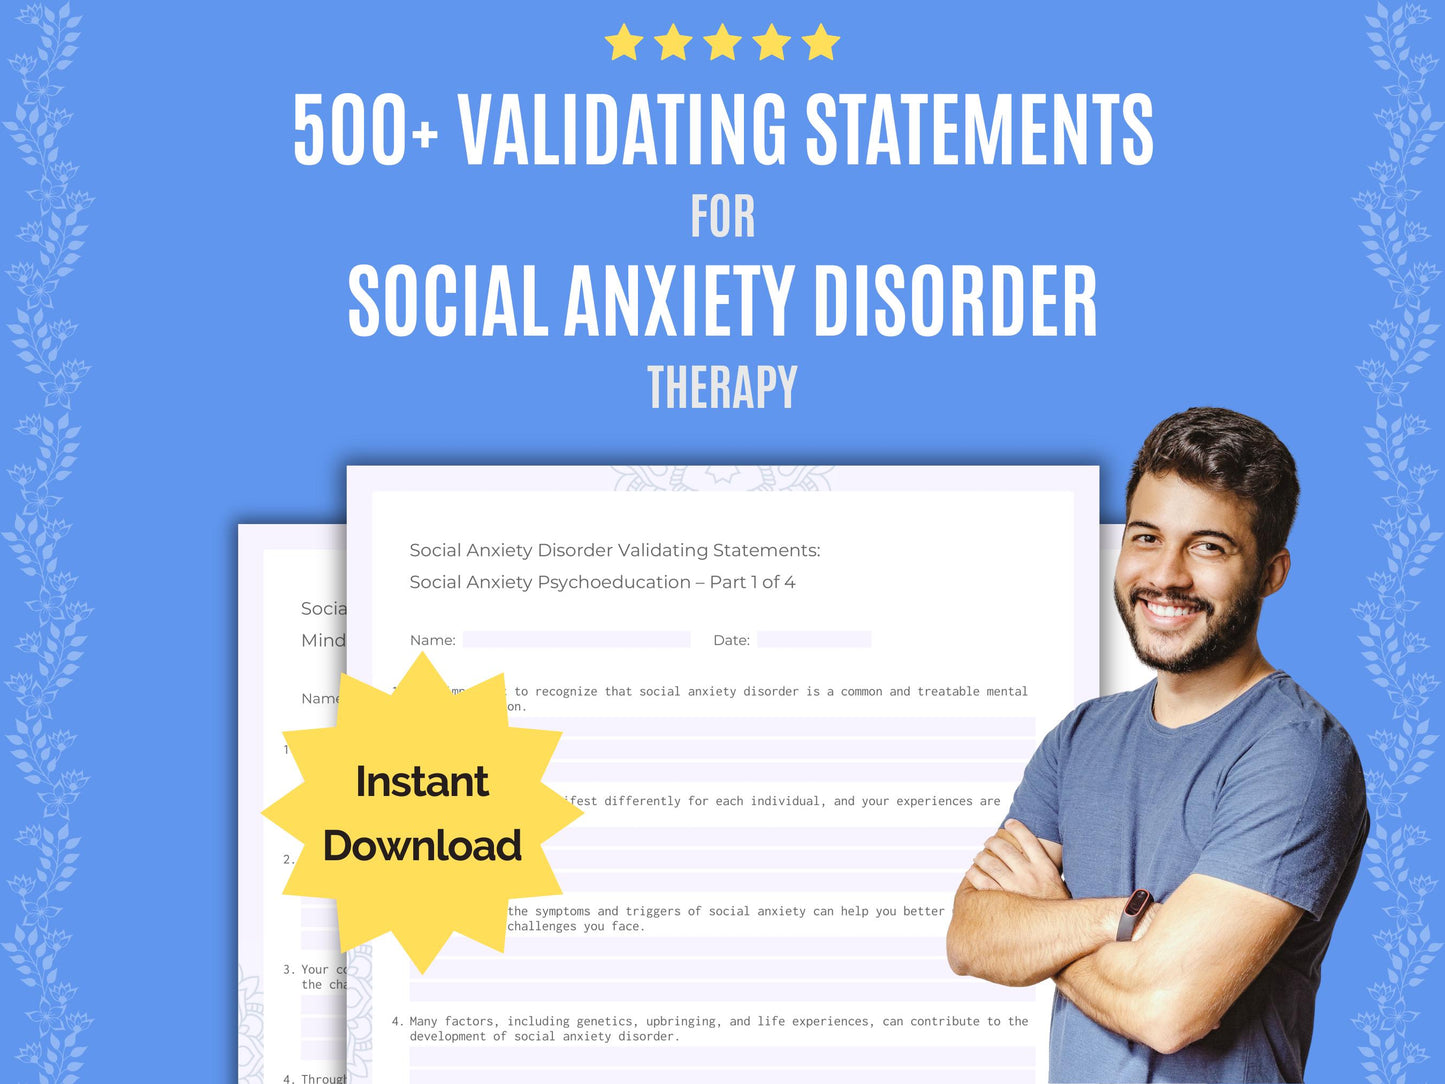 Social Anxiety Disorder Validating Therapy Statements